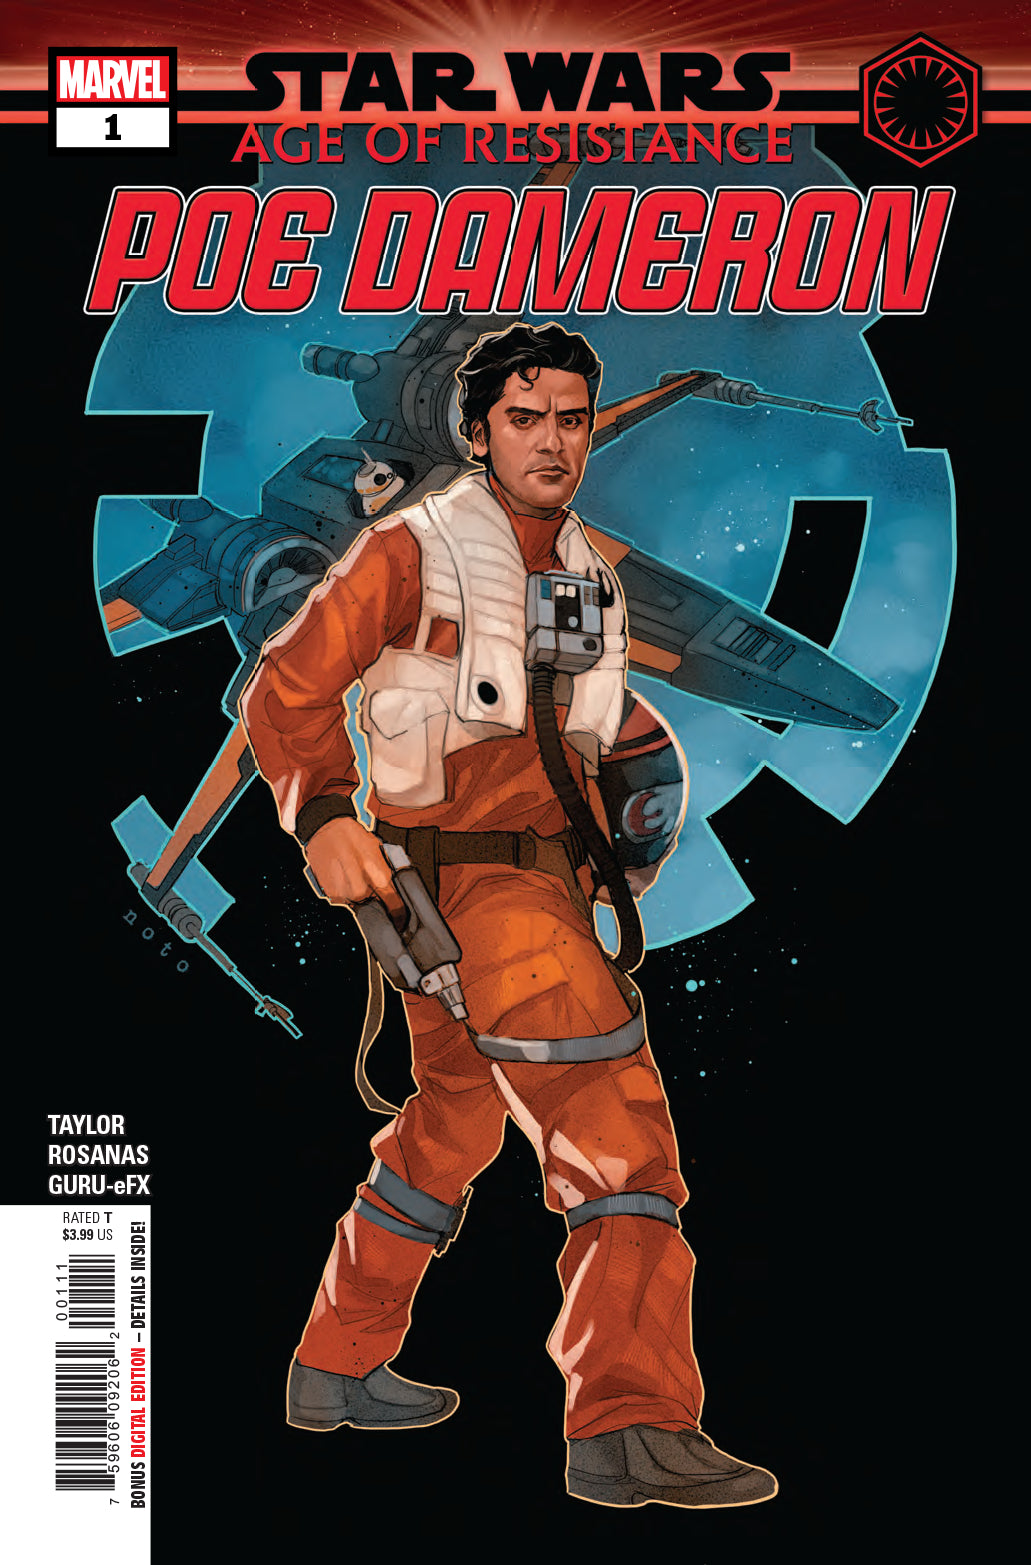 STAR WARS AOR POE DAMERON #1 | Game Master's Emporium (The New GME)